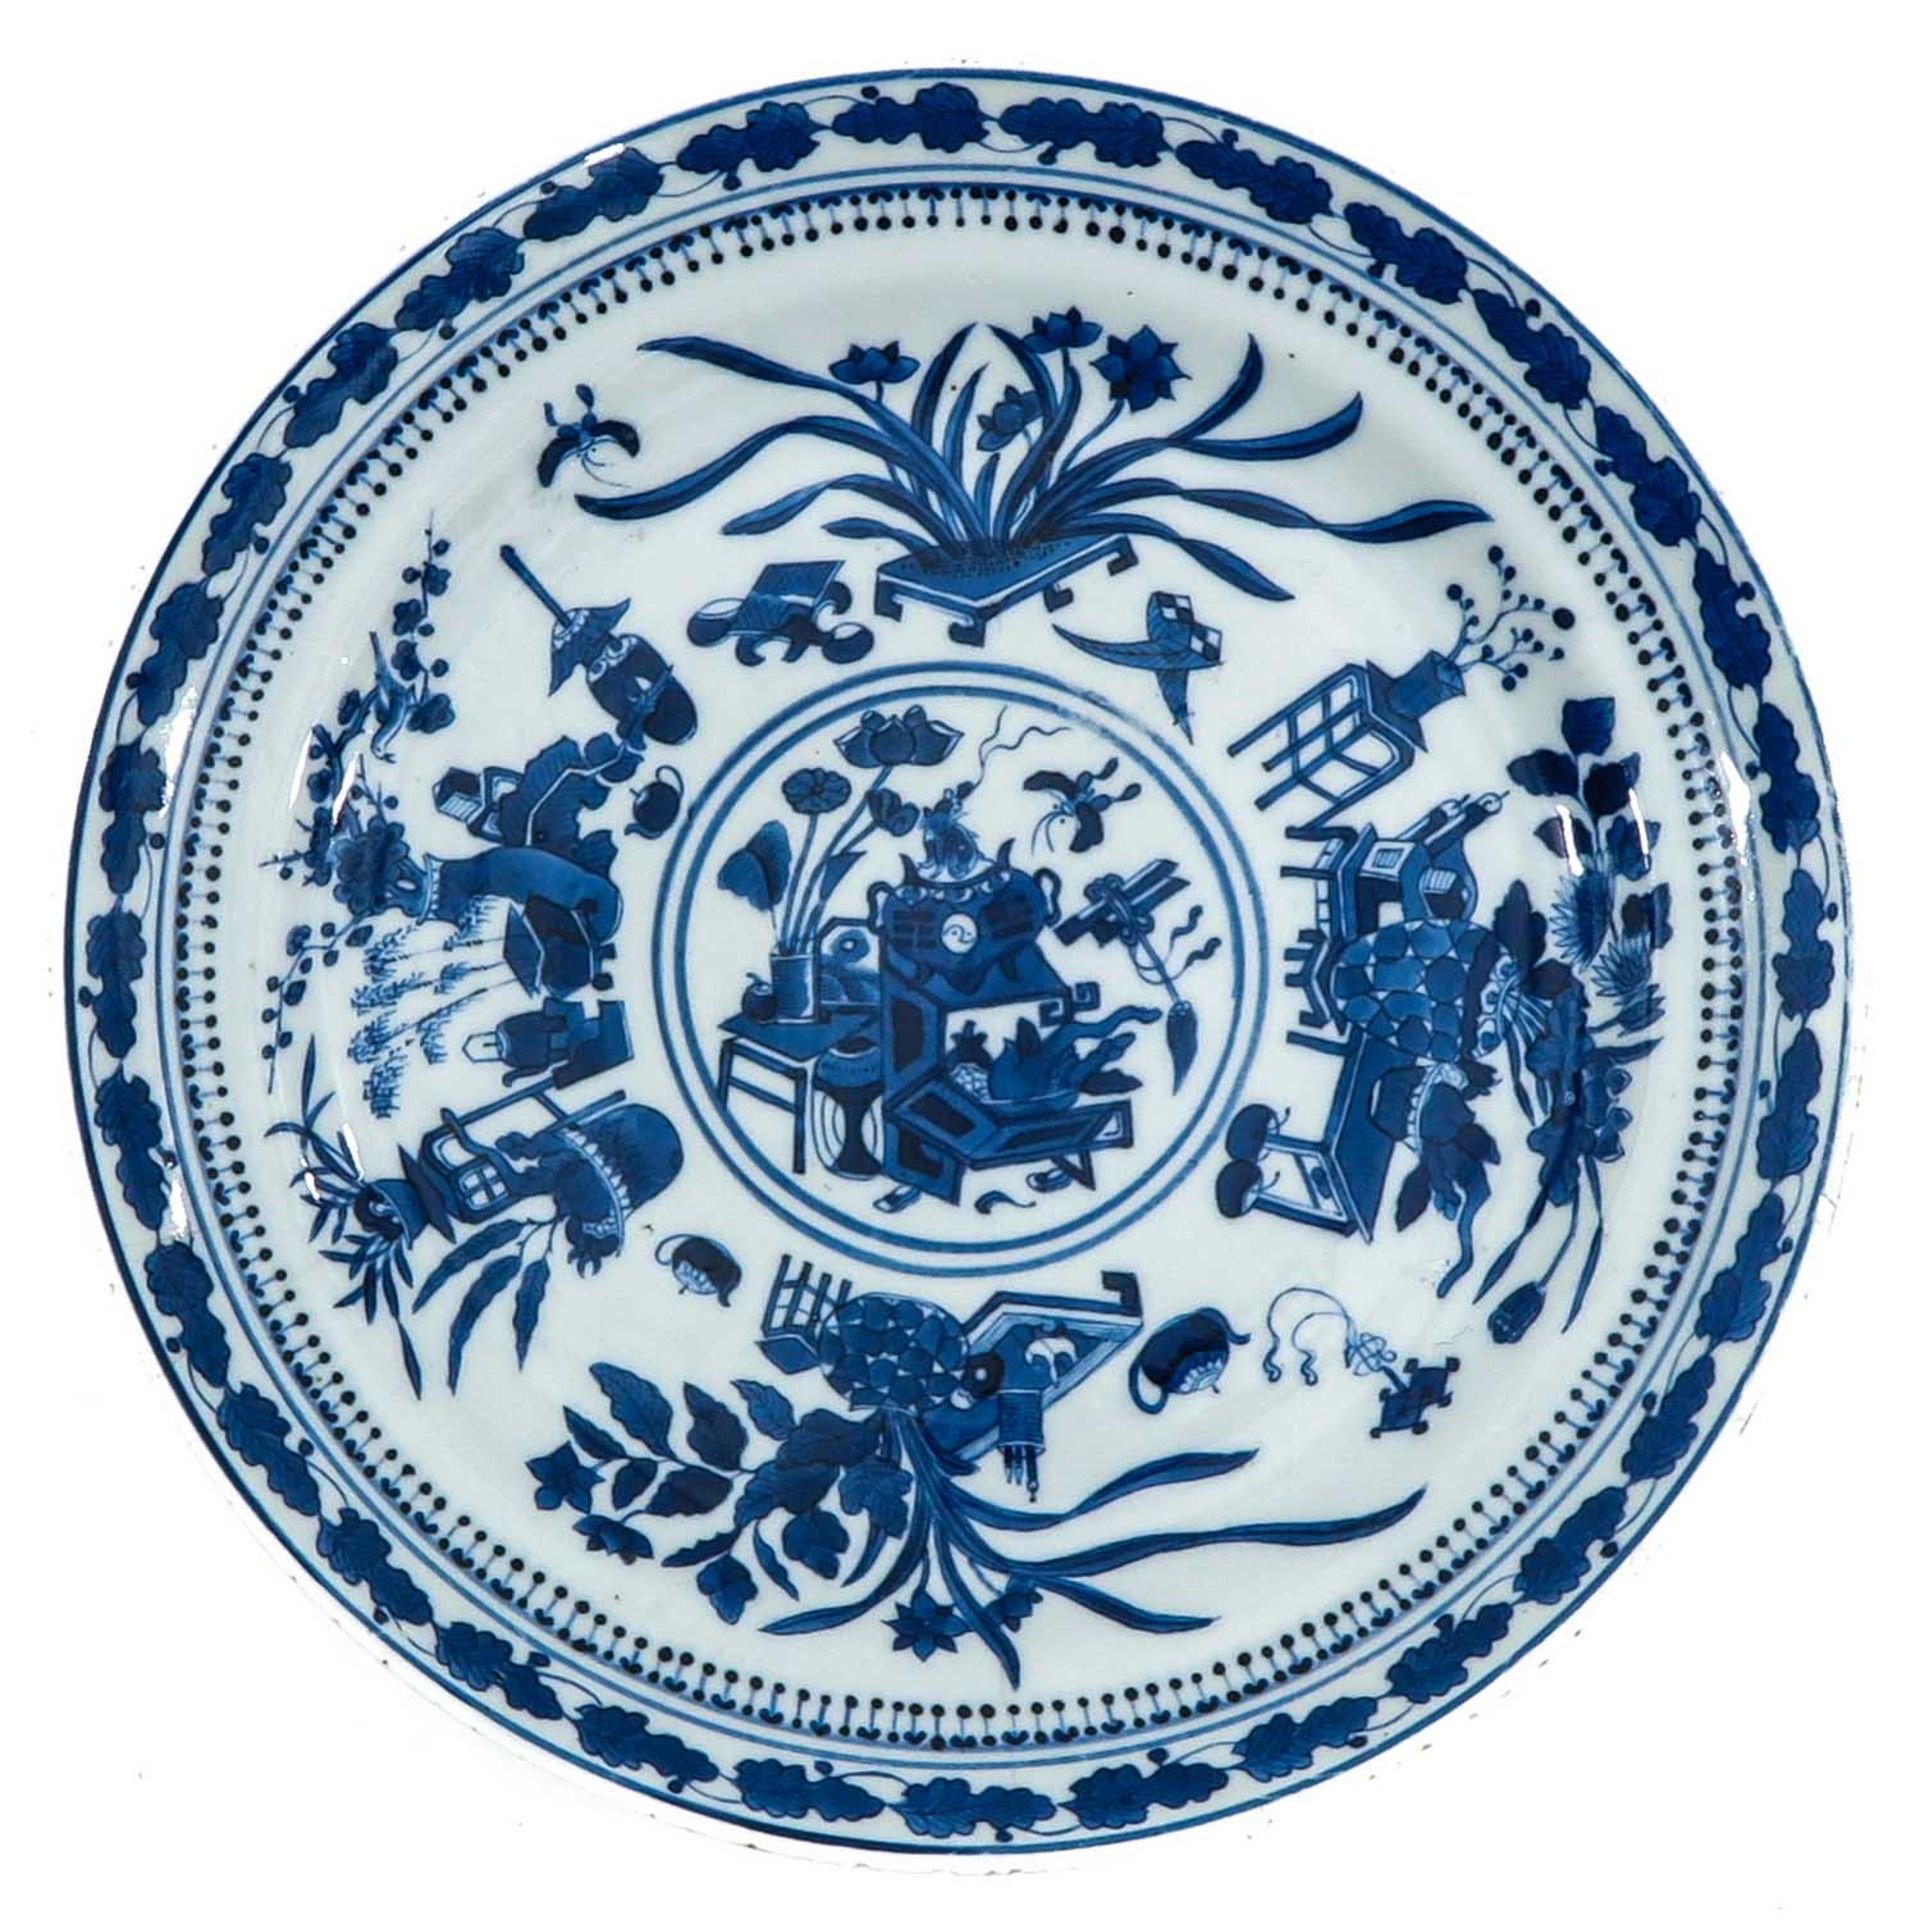 A Collection of 3 Blue and White Plates - Image 7 of 10